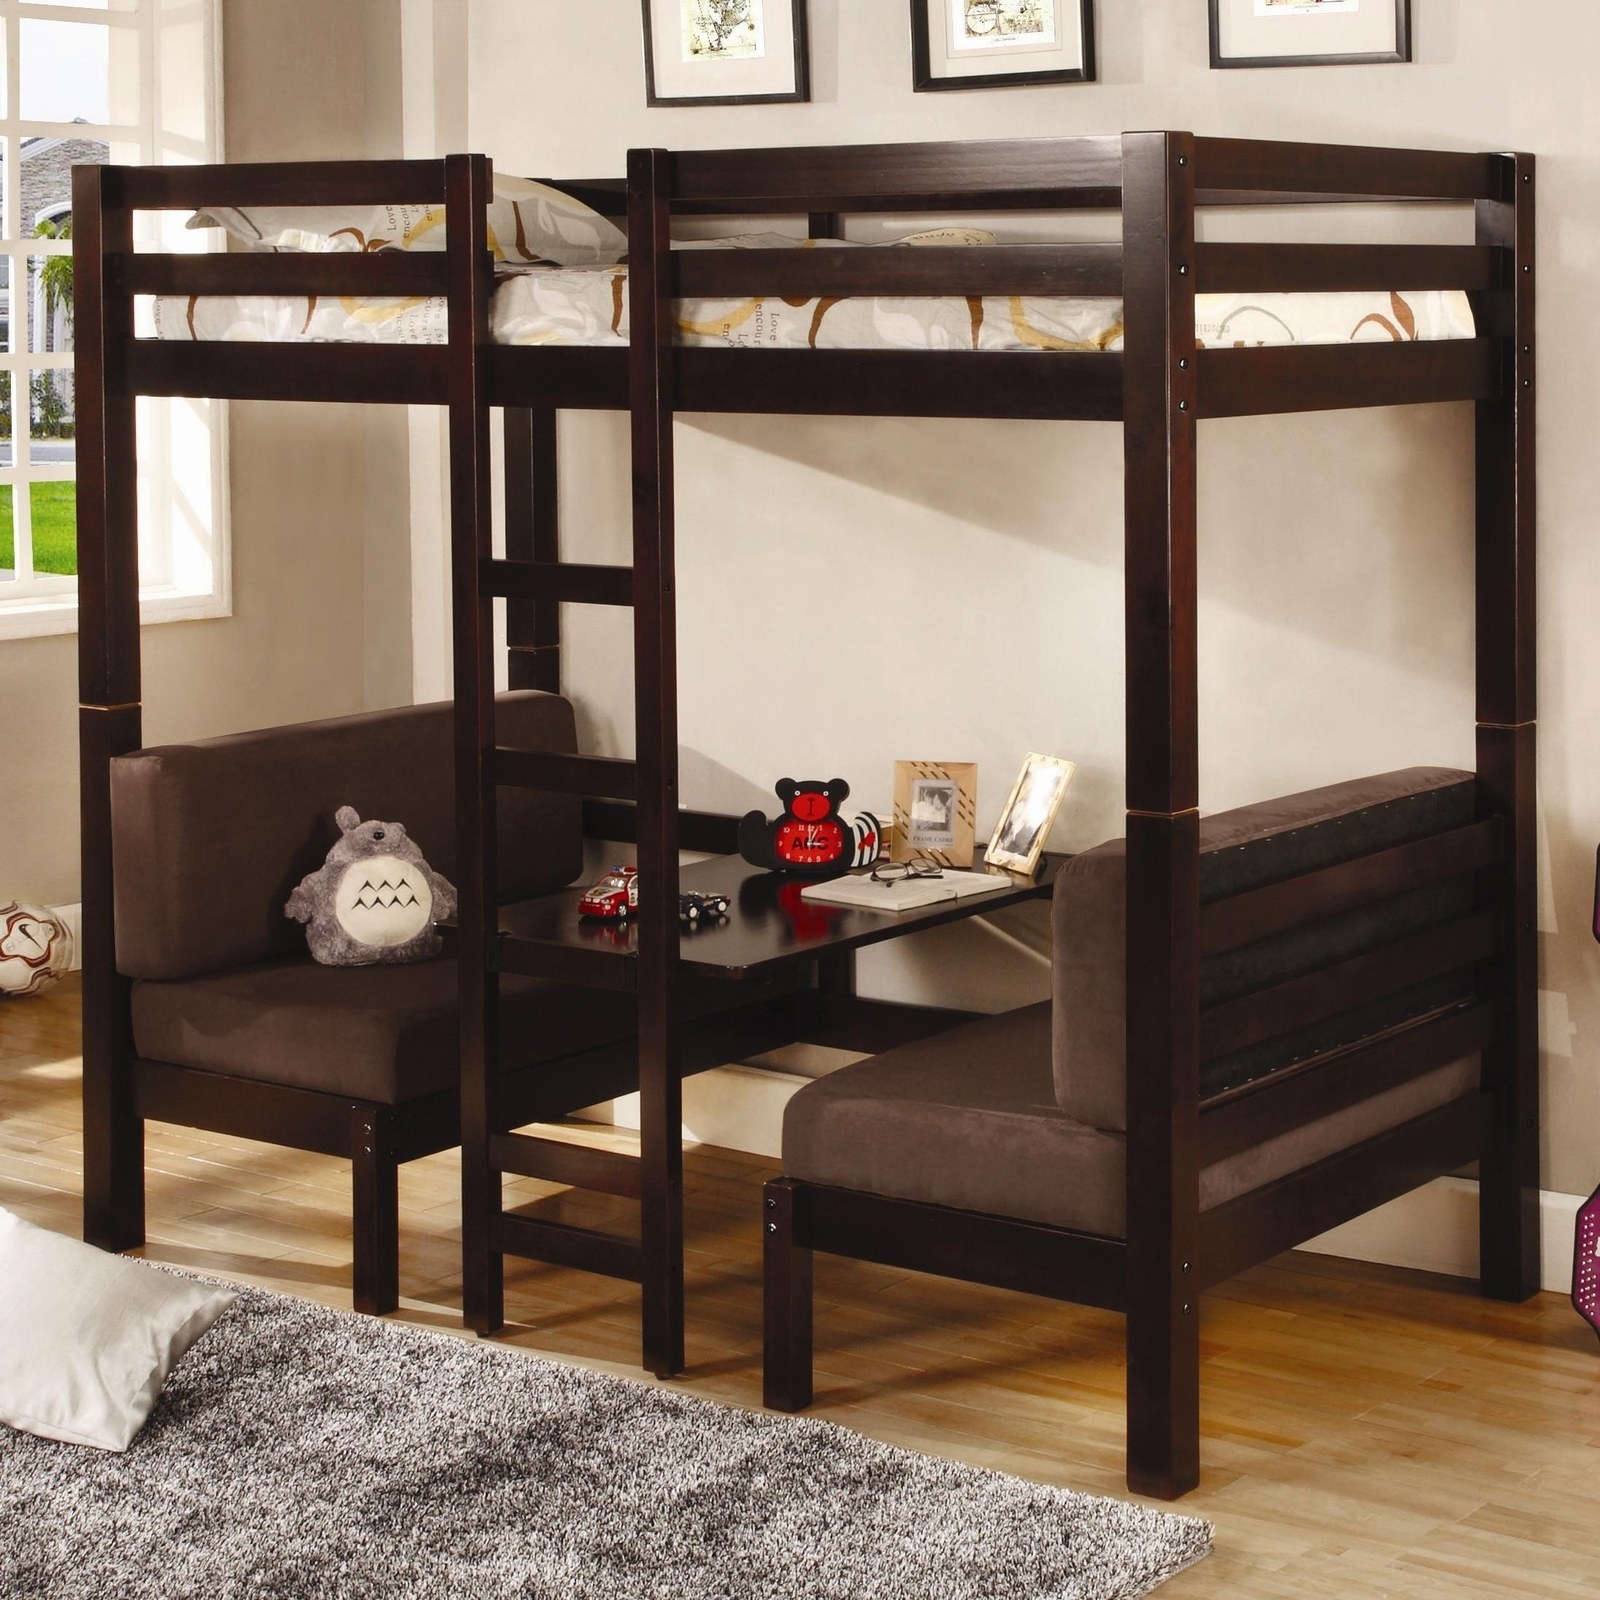 17 Loft Beds That Ll Save You So Much Space, Bunk Bed With Table Under